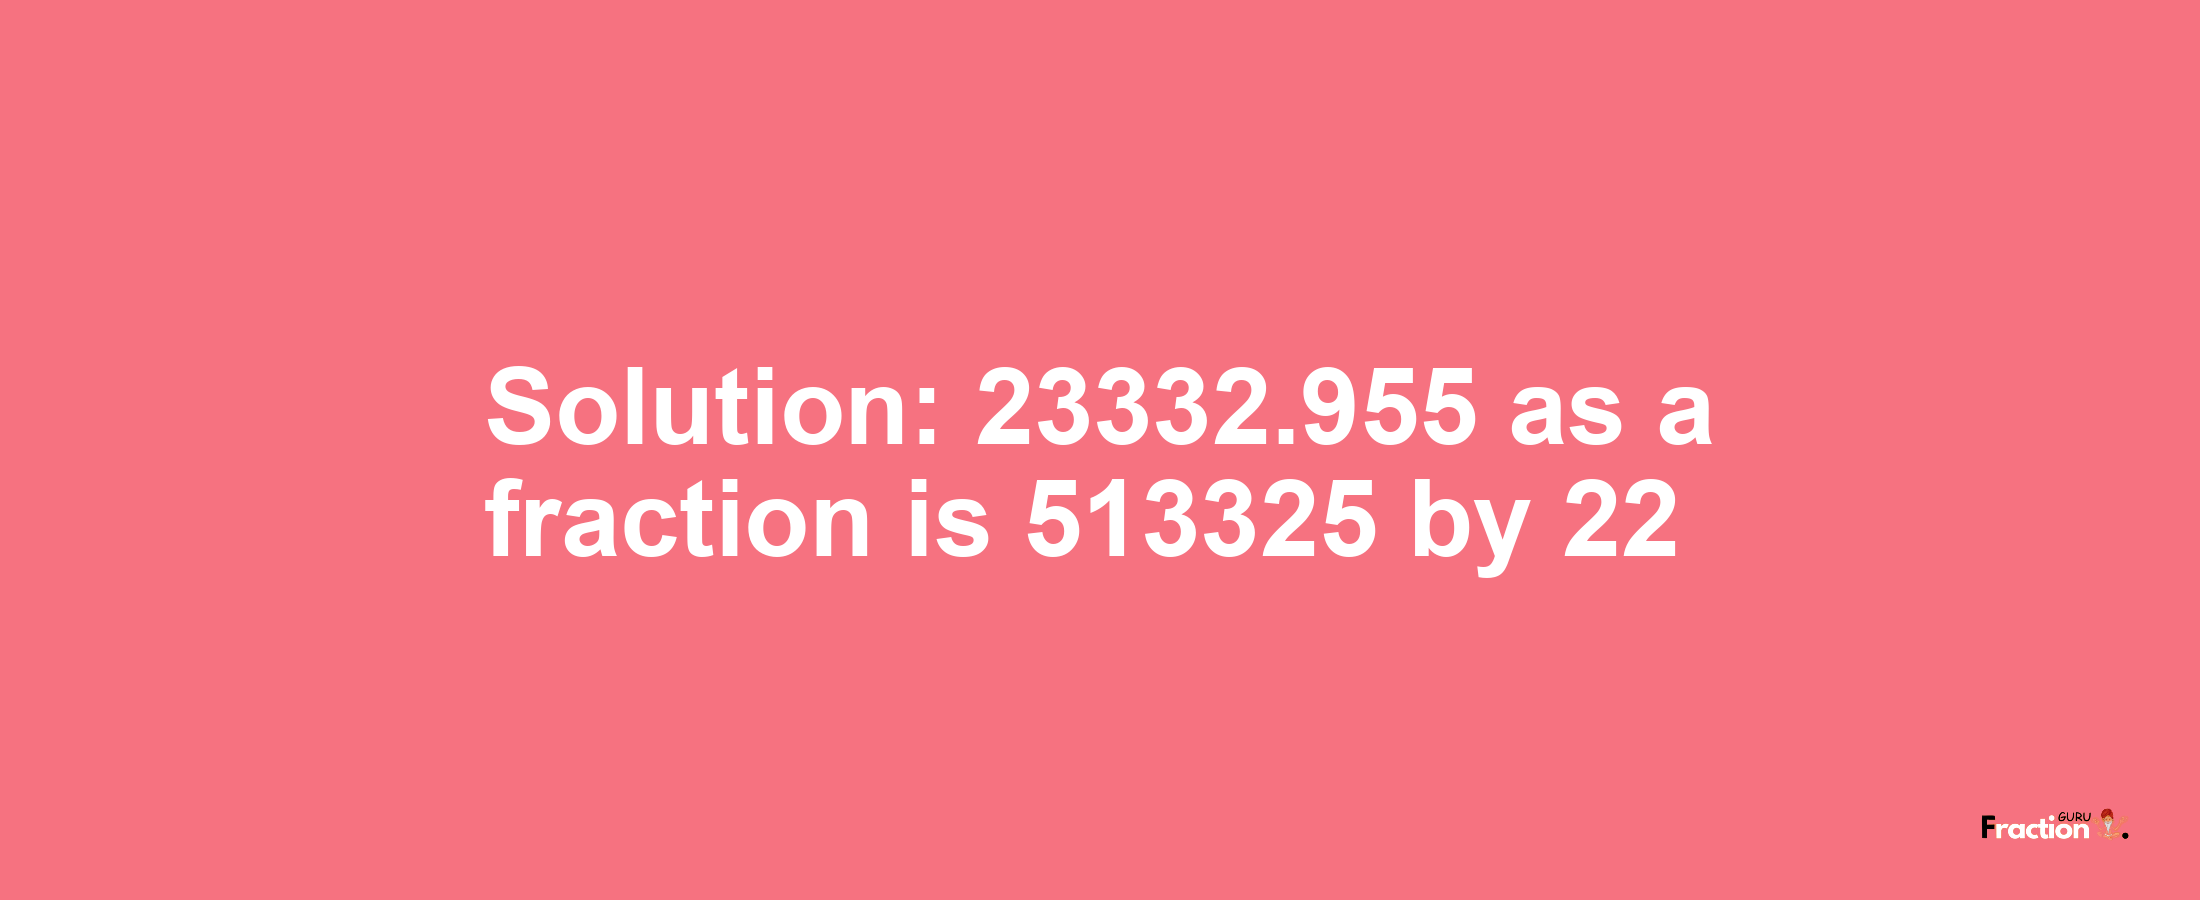 Solution:23332.955 as a fraction is 513325/22